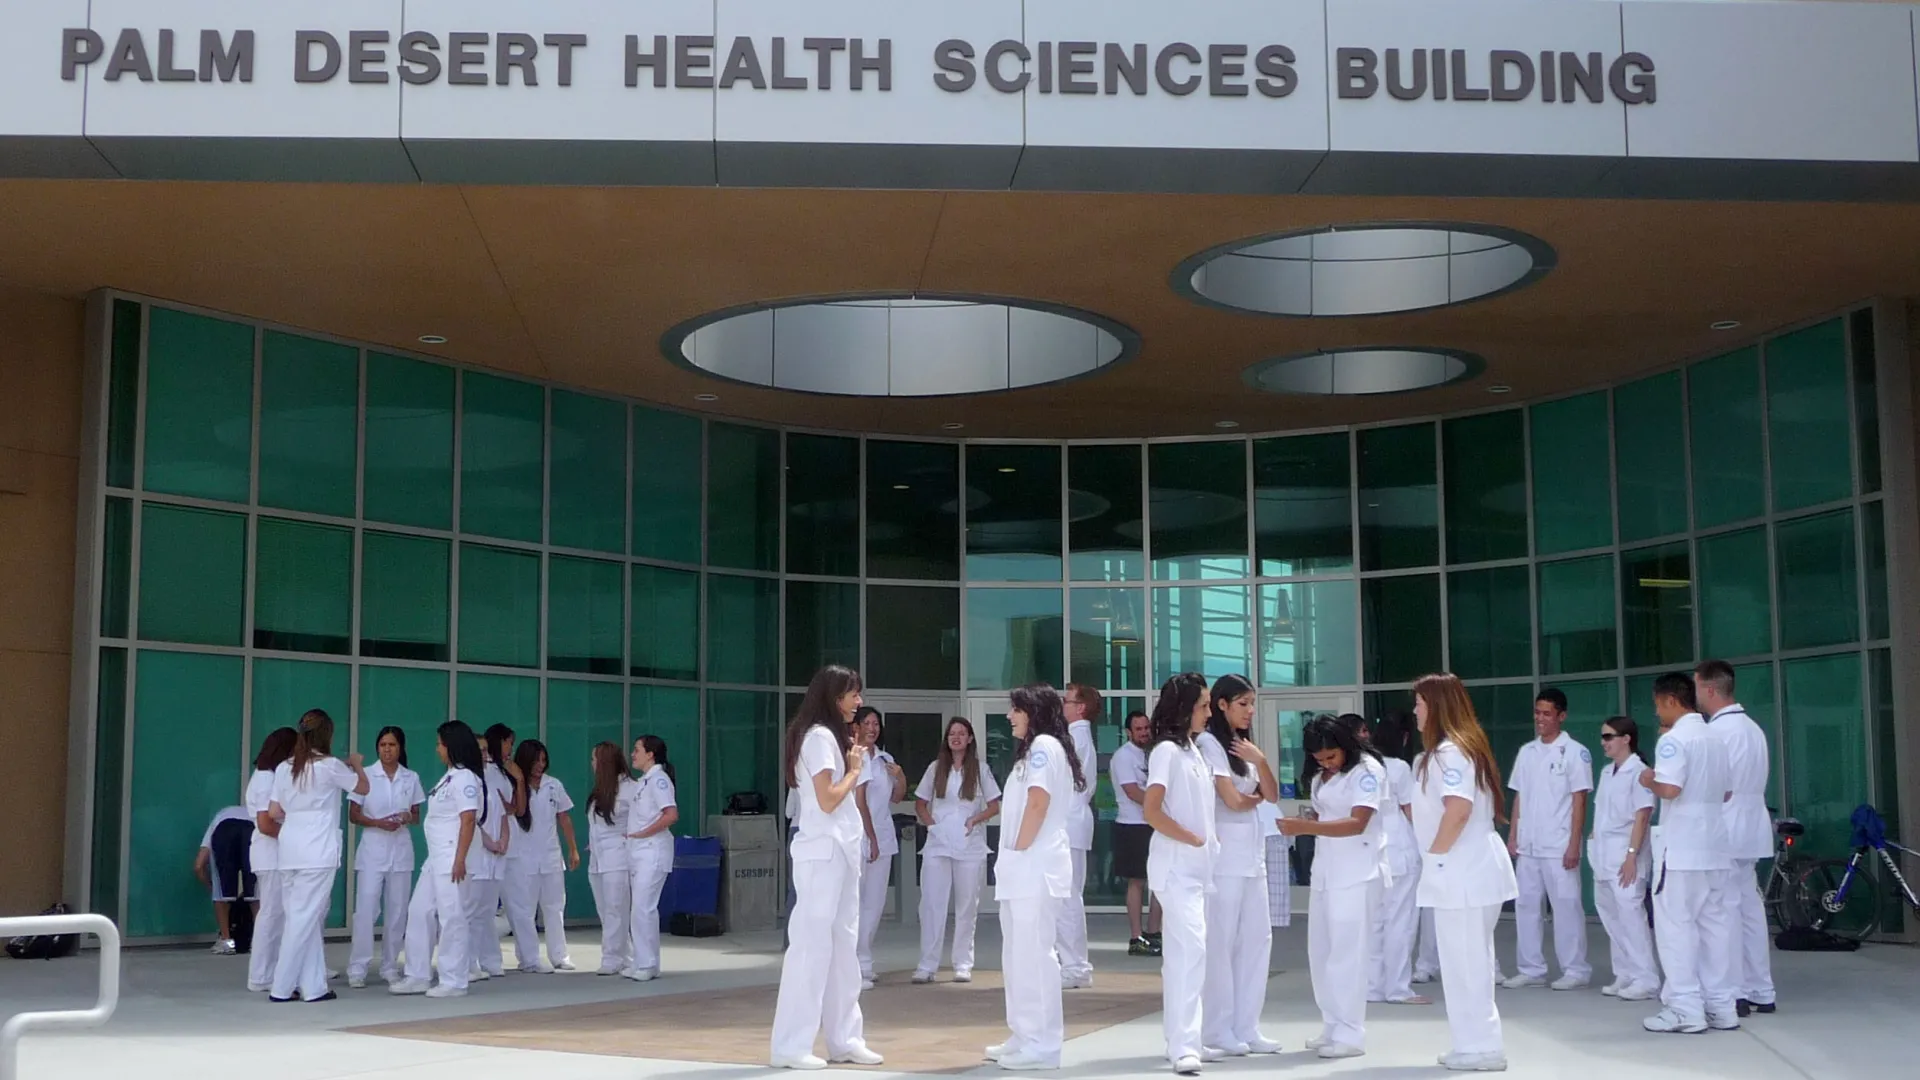 Nursing students gather in front of the Palm Desert Health Sciences Building at the Palm Desert Campus